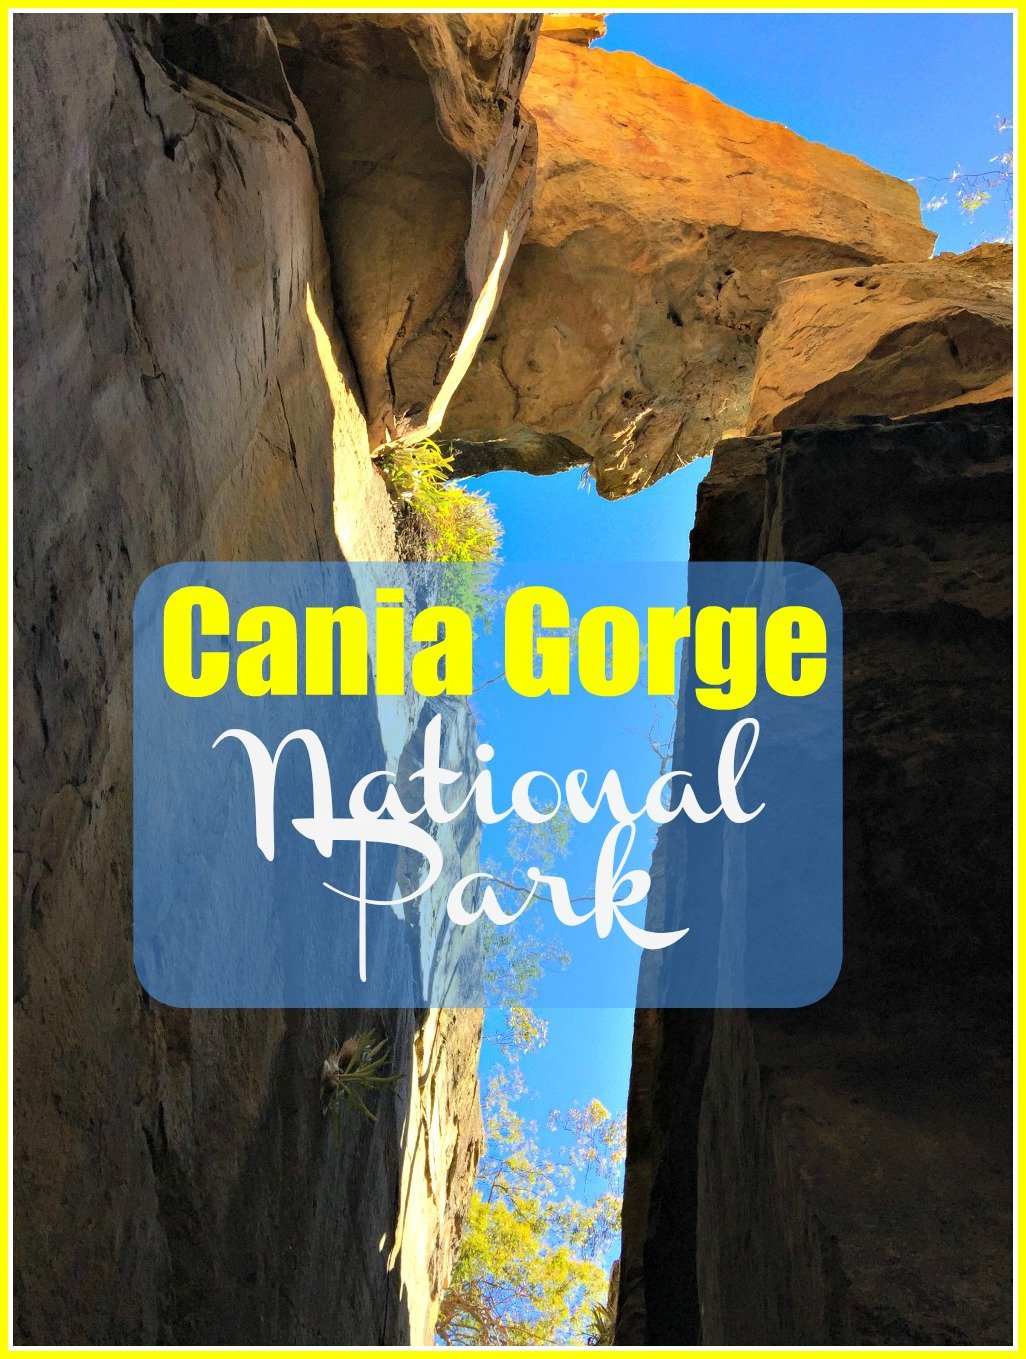 National Park Walking Tracks and Accommodation information for Cania Gorge National Park, situated between Biloela and Monto on Queensland's Burnett Highway